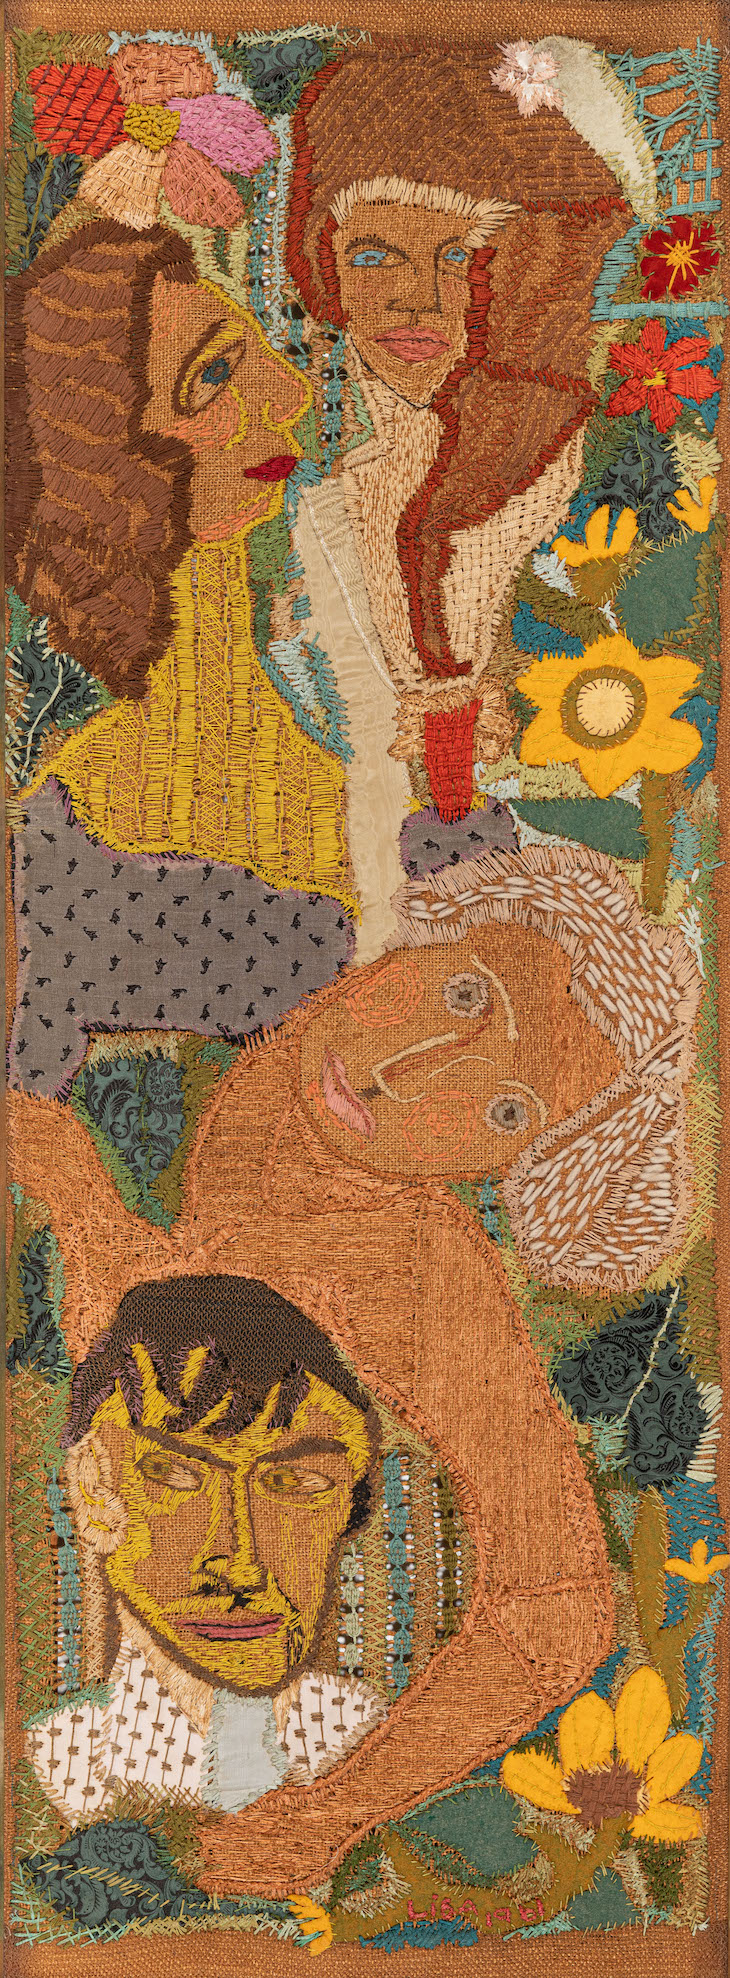 Textile picture with a self-portrait and a portrait of Trude Willner (n.d.), Lisa Rodewald.